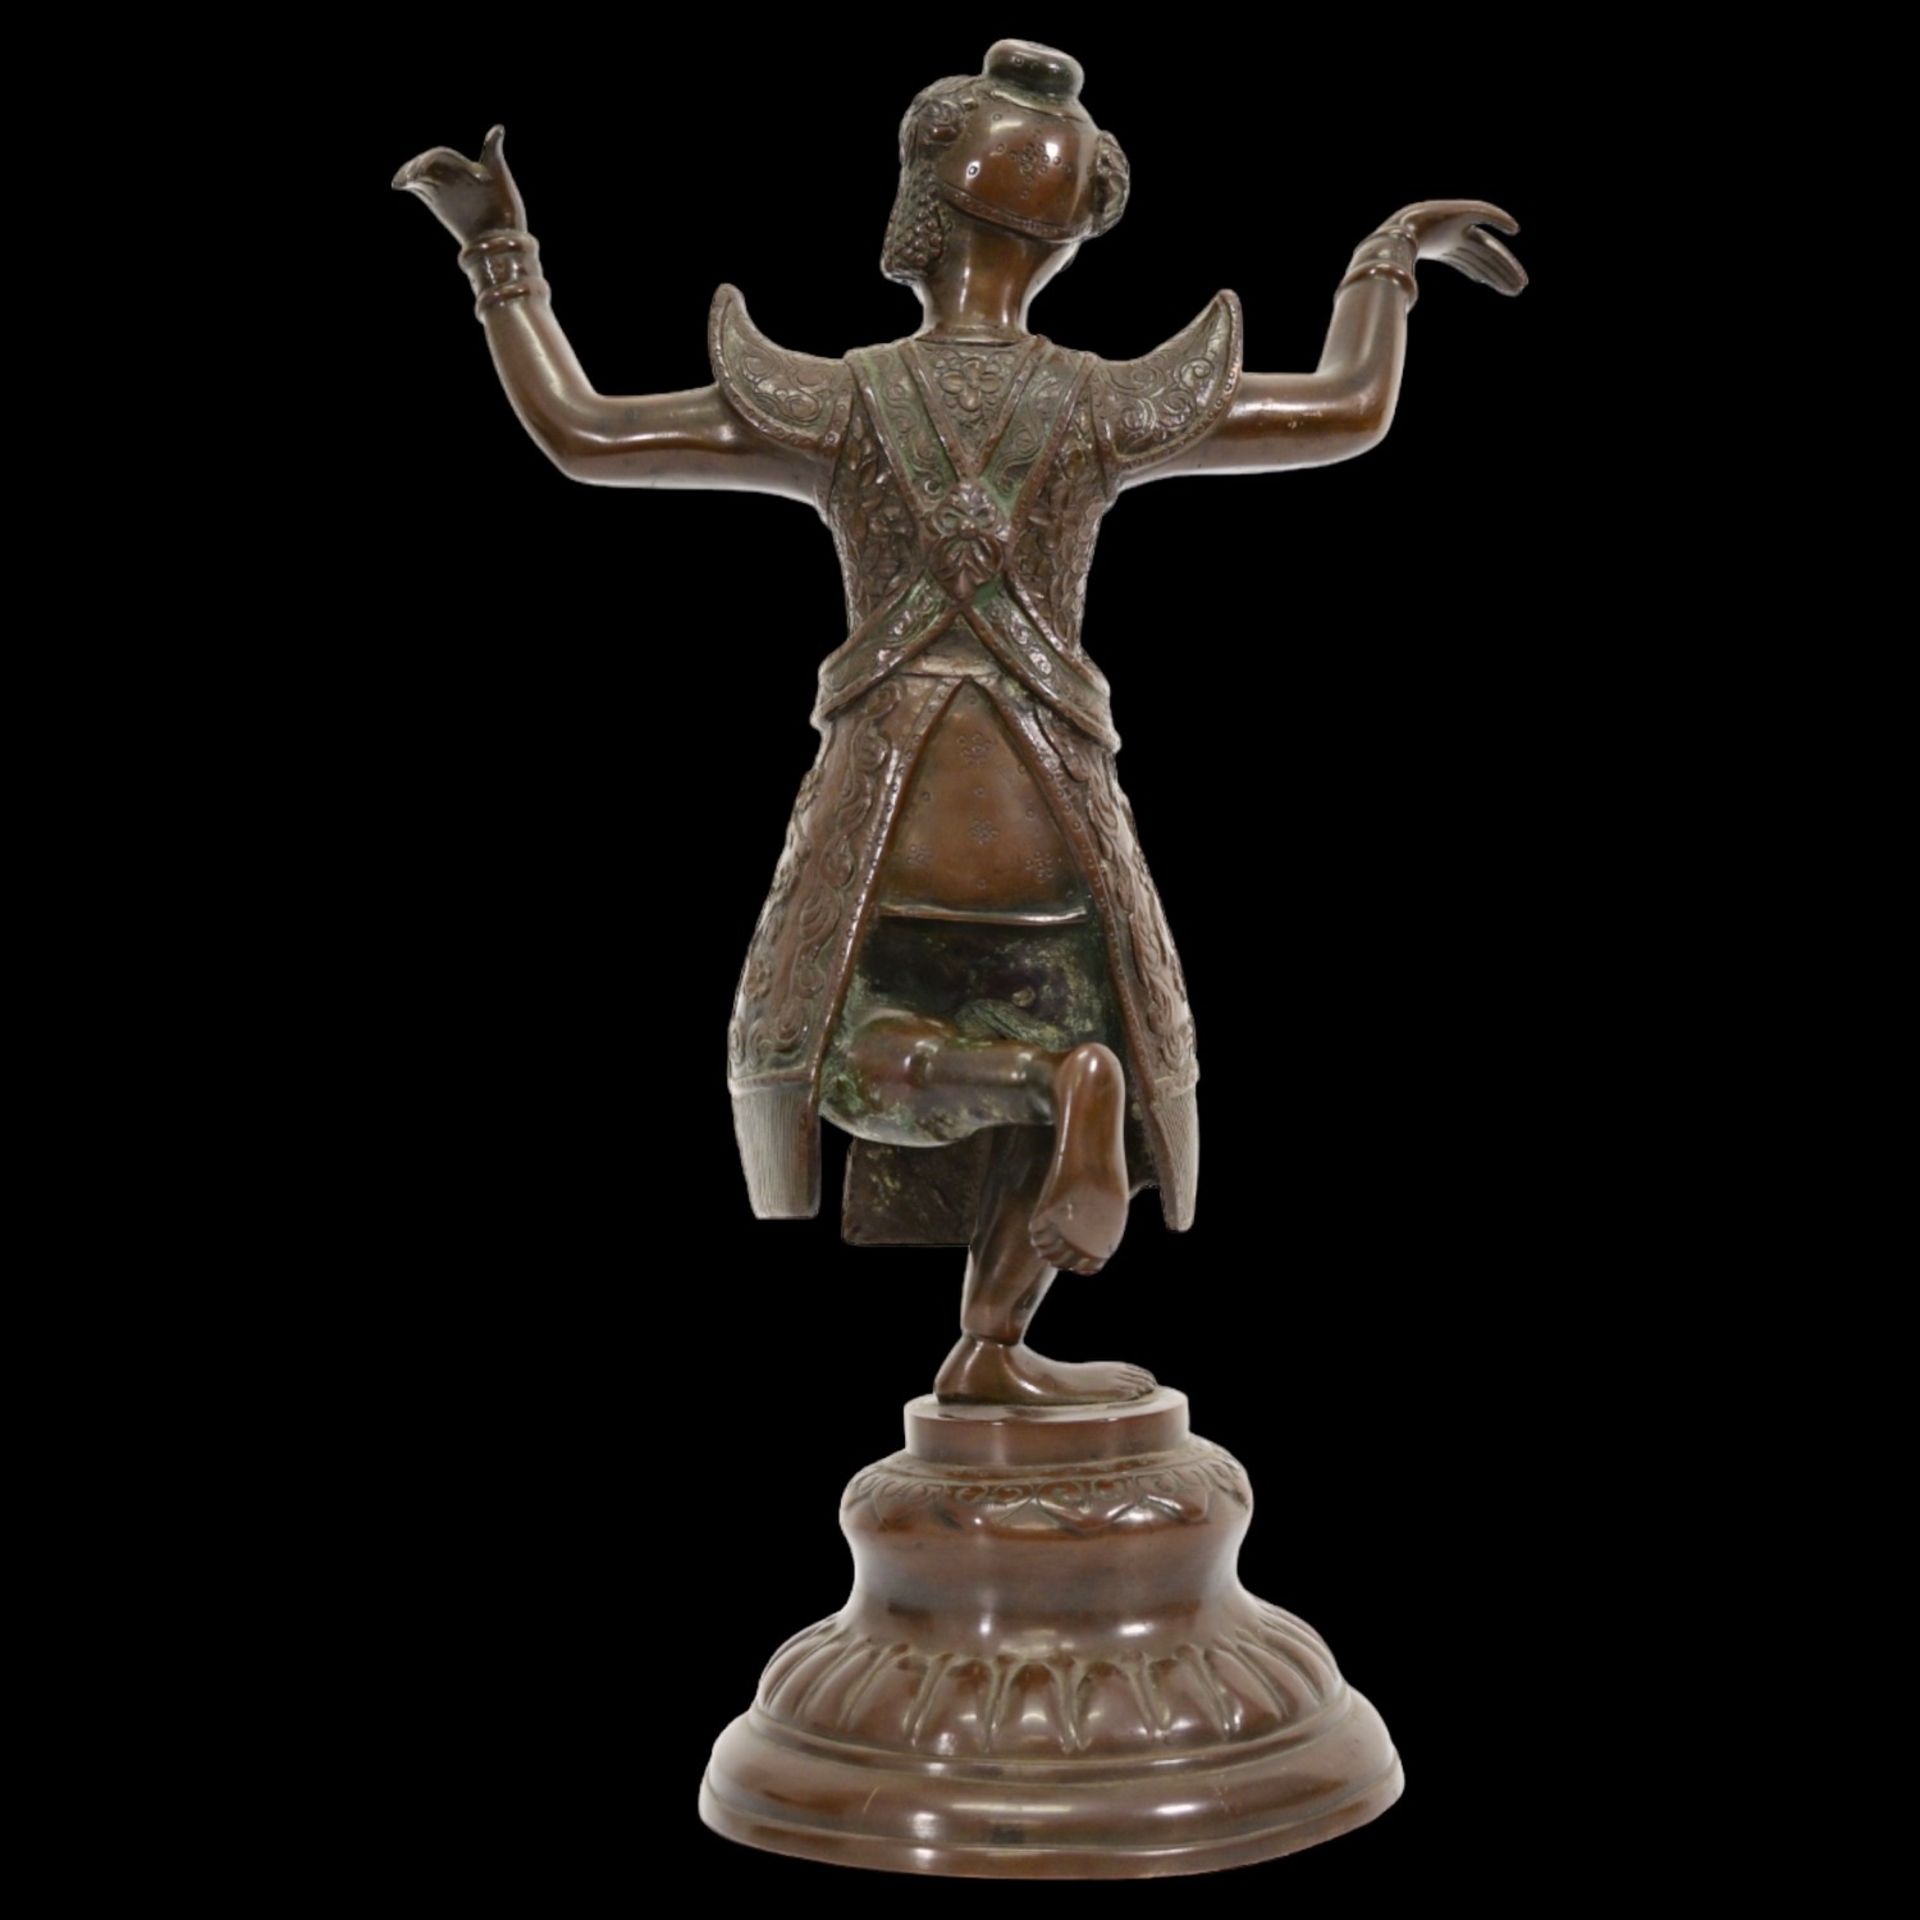 Bronze sculpture "Balinese Dancer", France, early 20th century. Collectibles and home decor. - Bild 5 aus 7